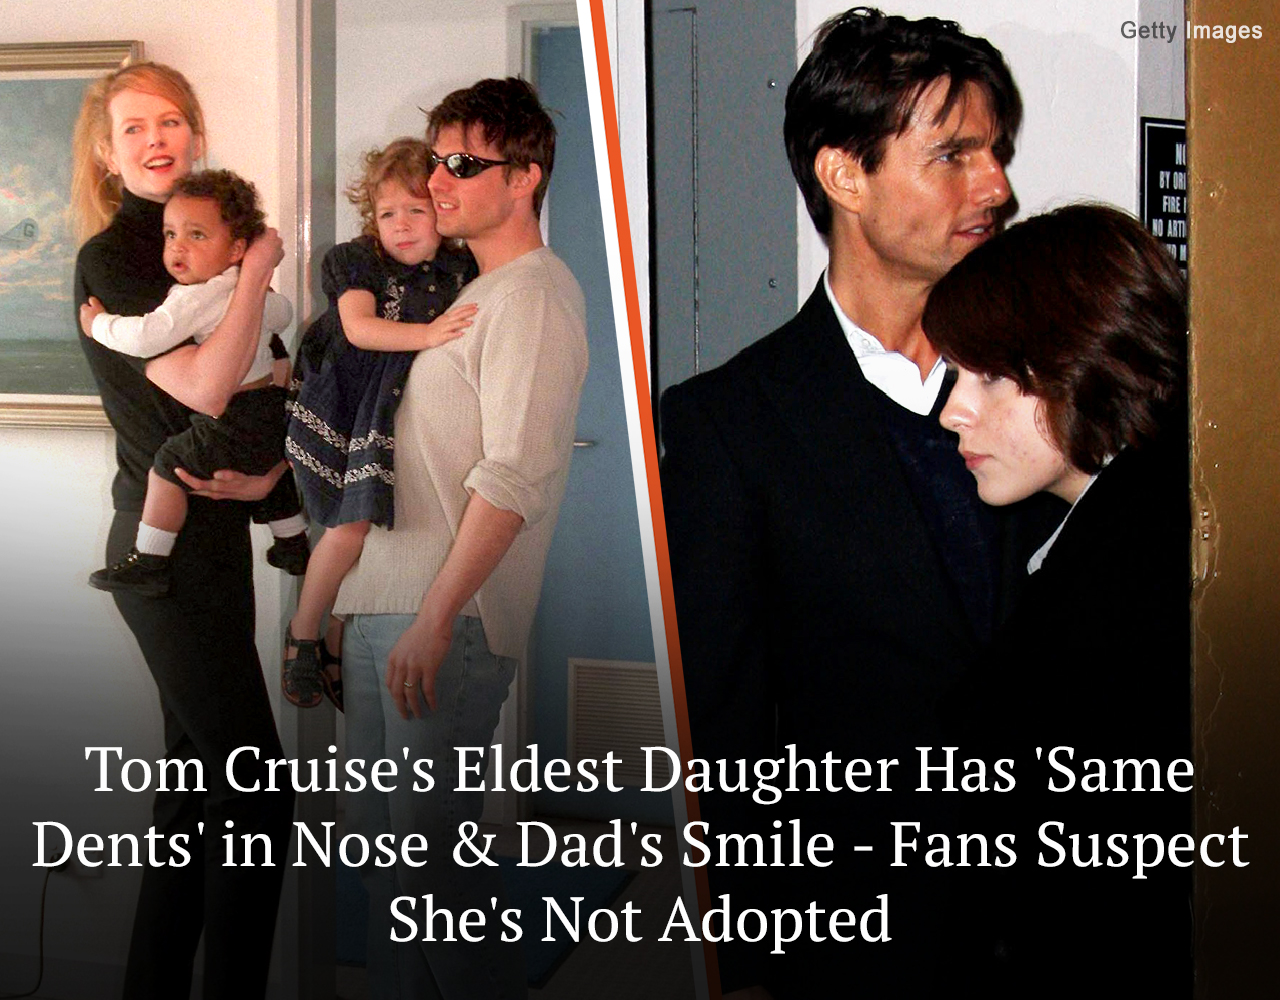 Tom Cruise's Eldest Daughter Has 'Same Dents' in Nose & Dad's Smile ...